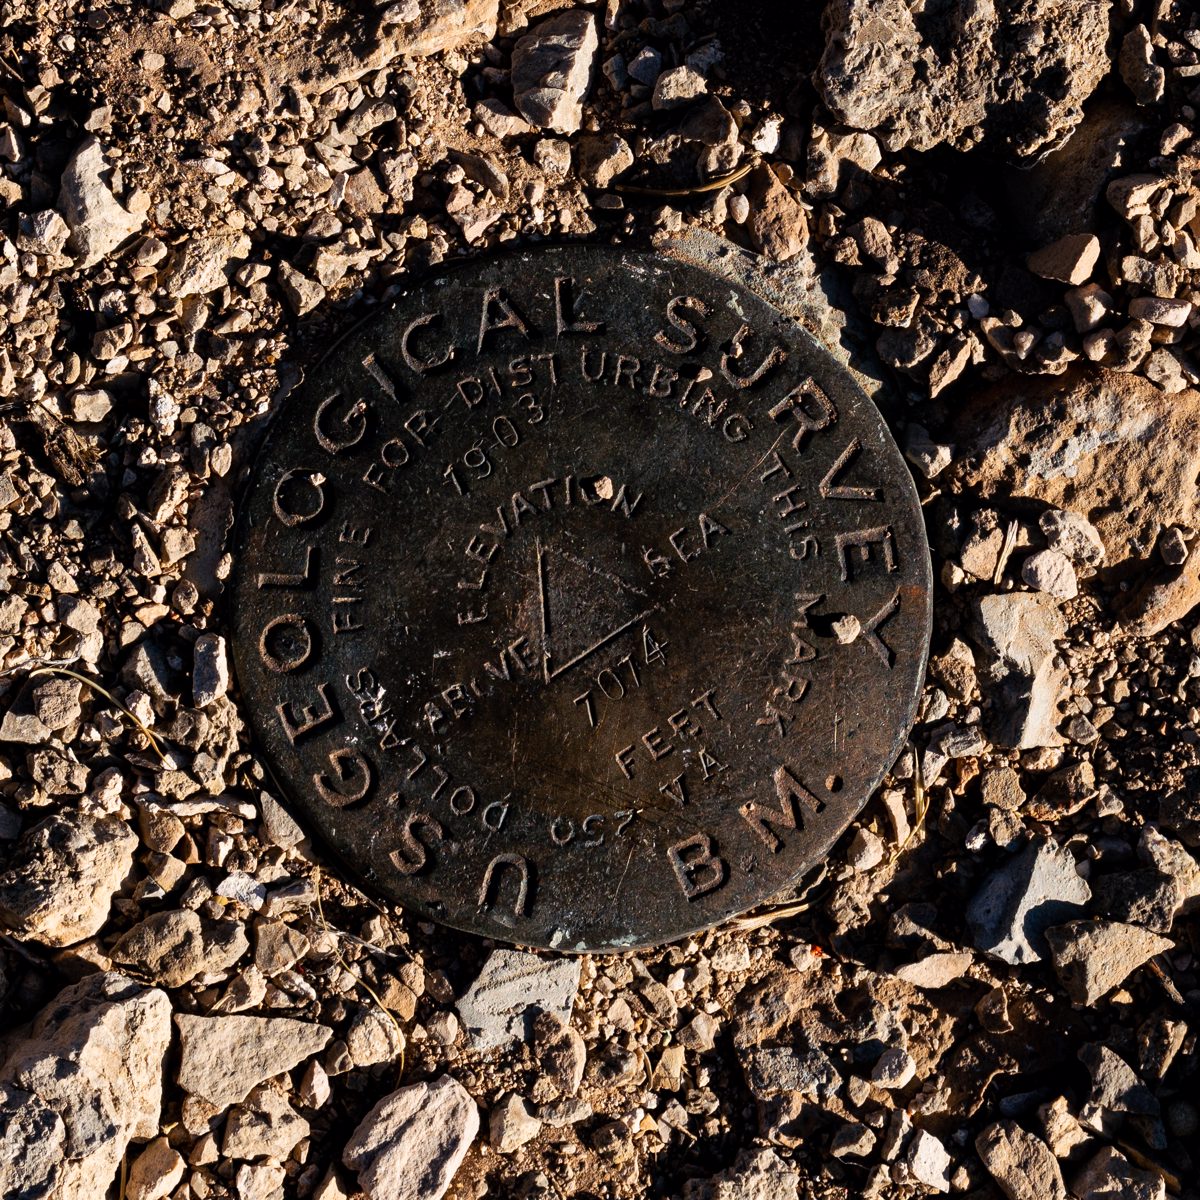 2019 October Benchmark on Comanche Point